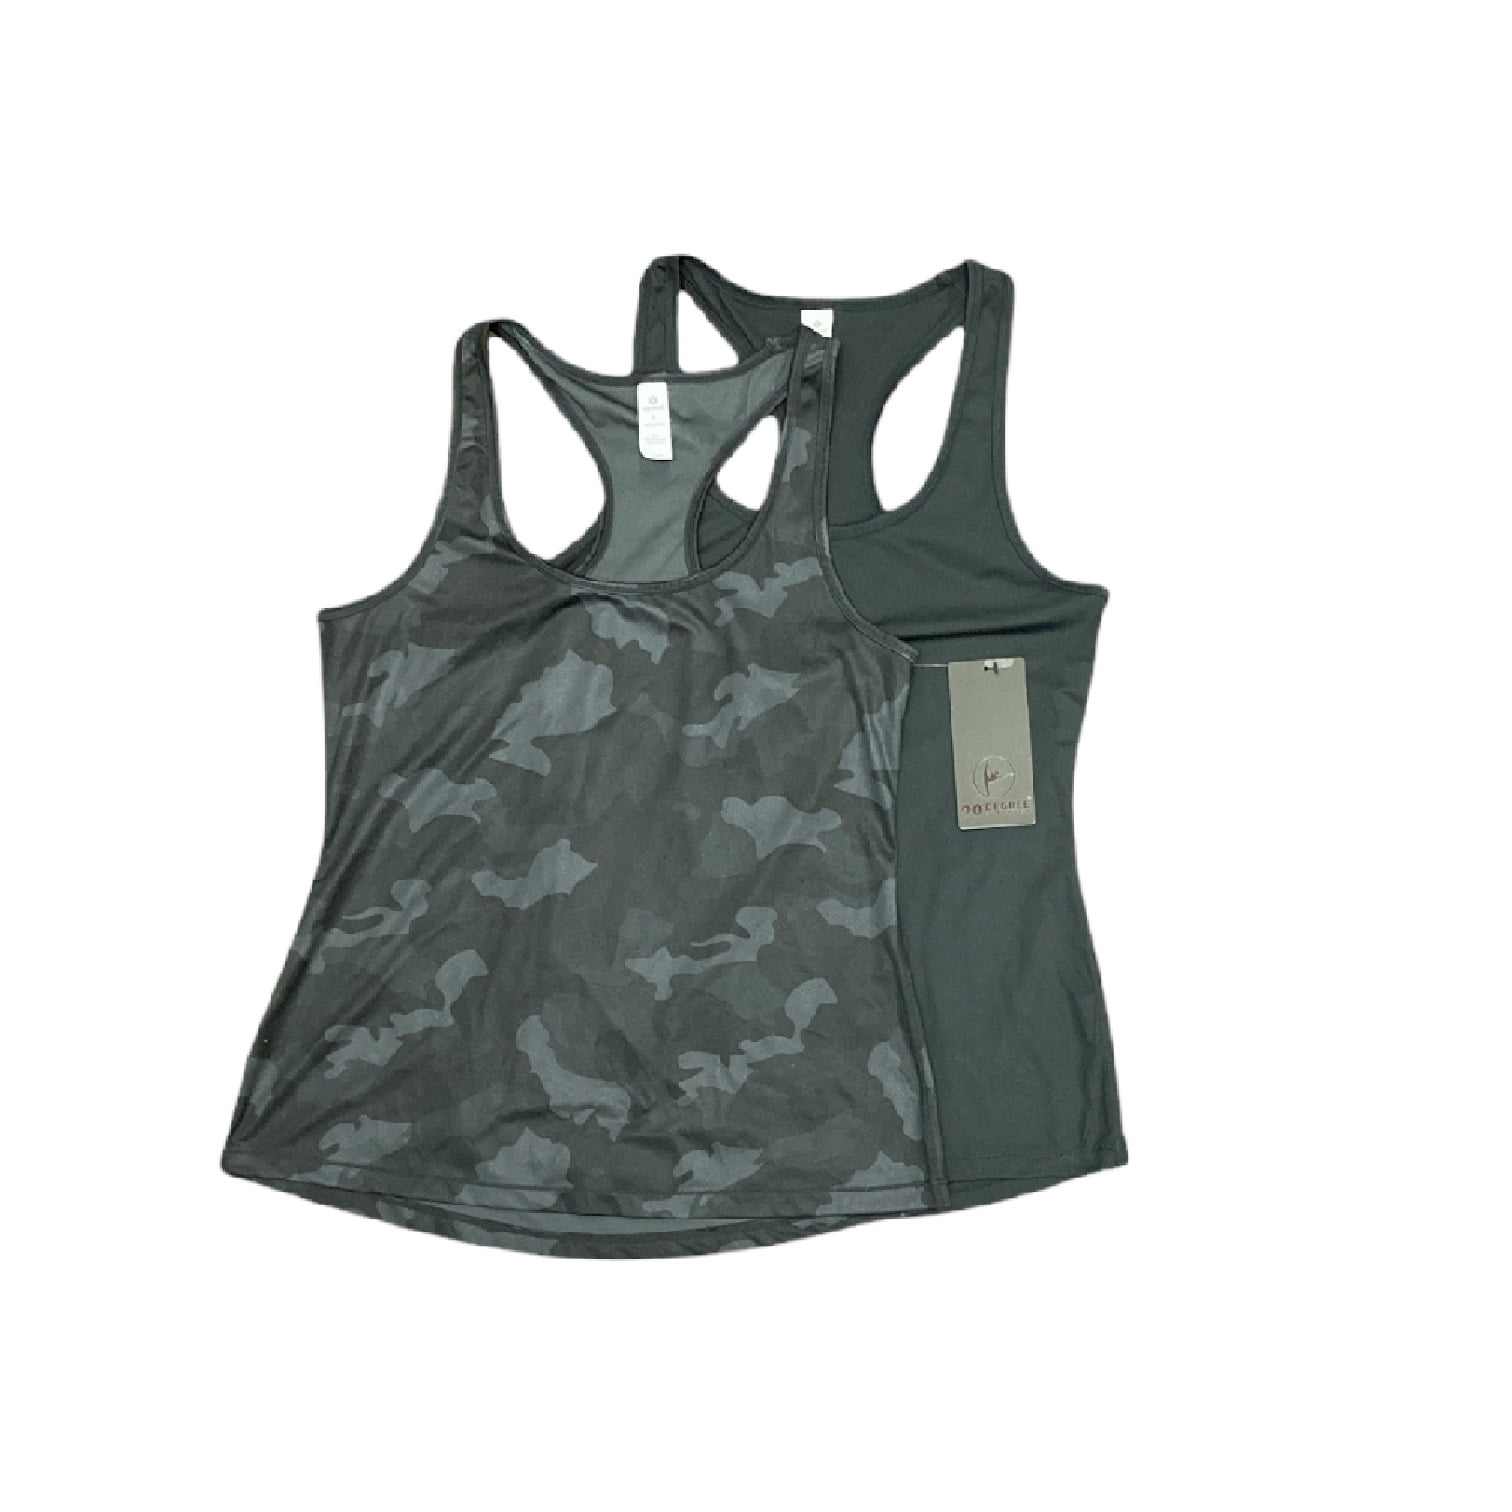 Grey Scale Leaf Camo Fitted Tank Top, Athletic Tank Top, Fitted Tank Tops  for Women, Yoga Tank Top, Workout Tank Top, Active Wear, Gym Tank -   Canada